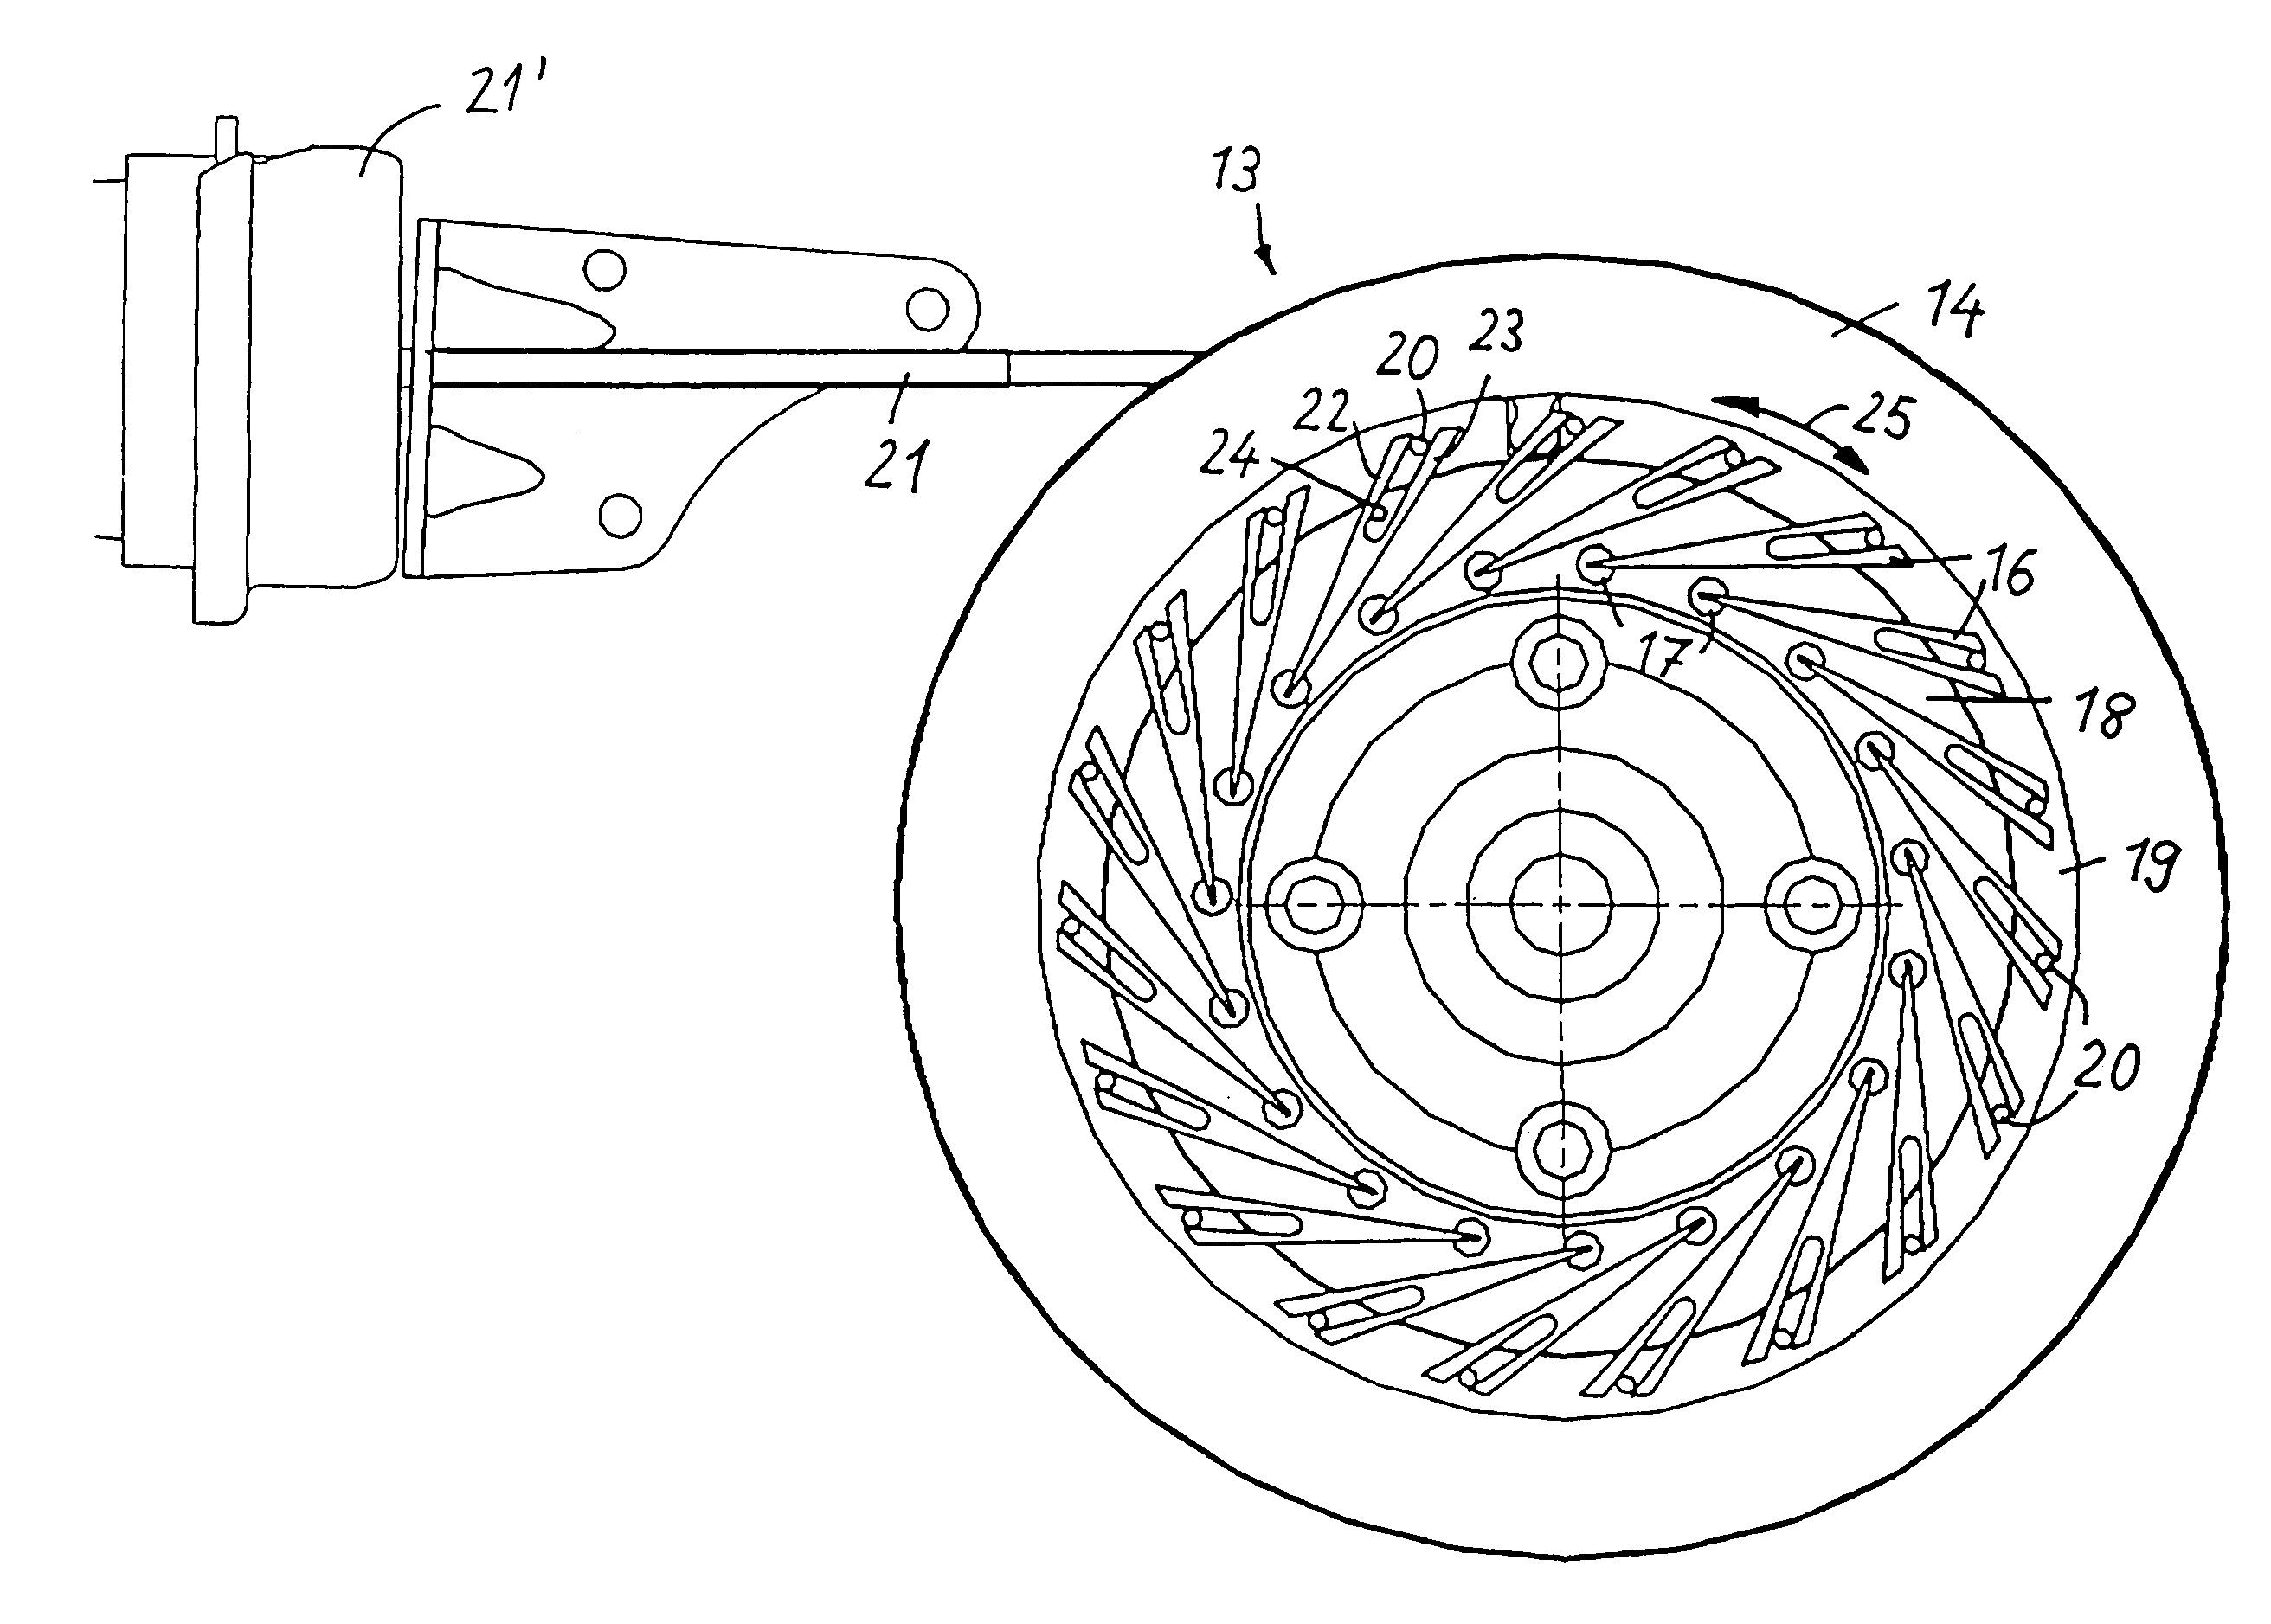 Compressor, particularly in an exhaust gas turbocharger for an internal combustion engine